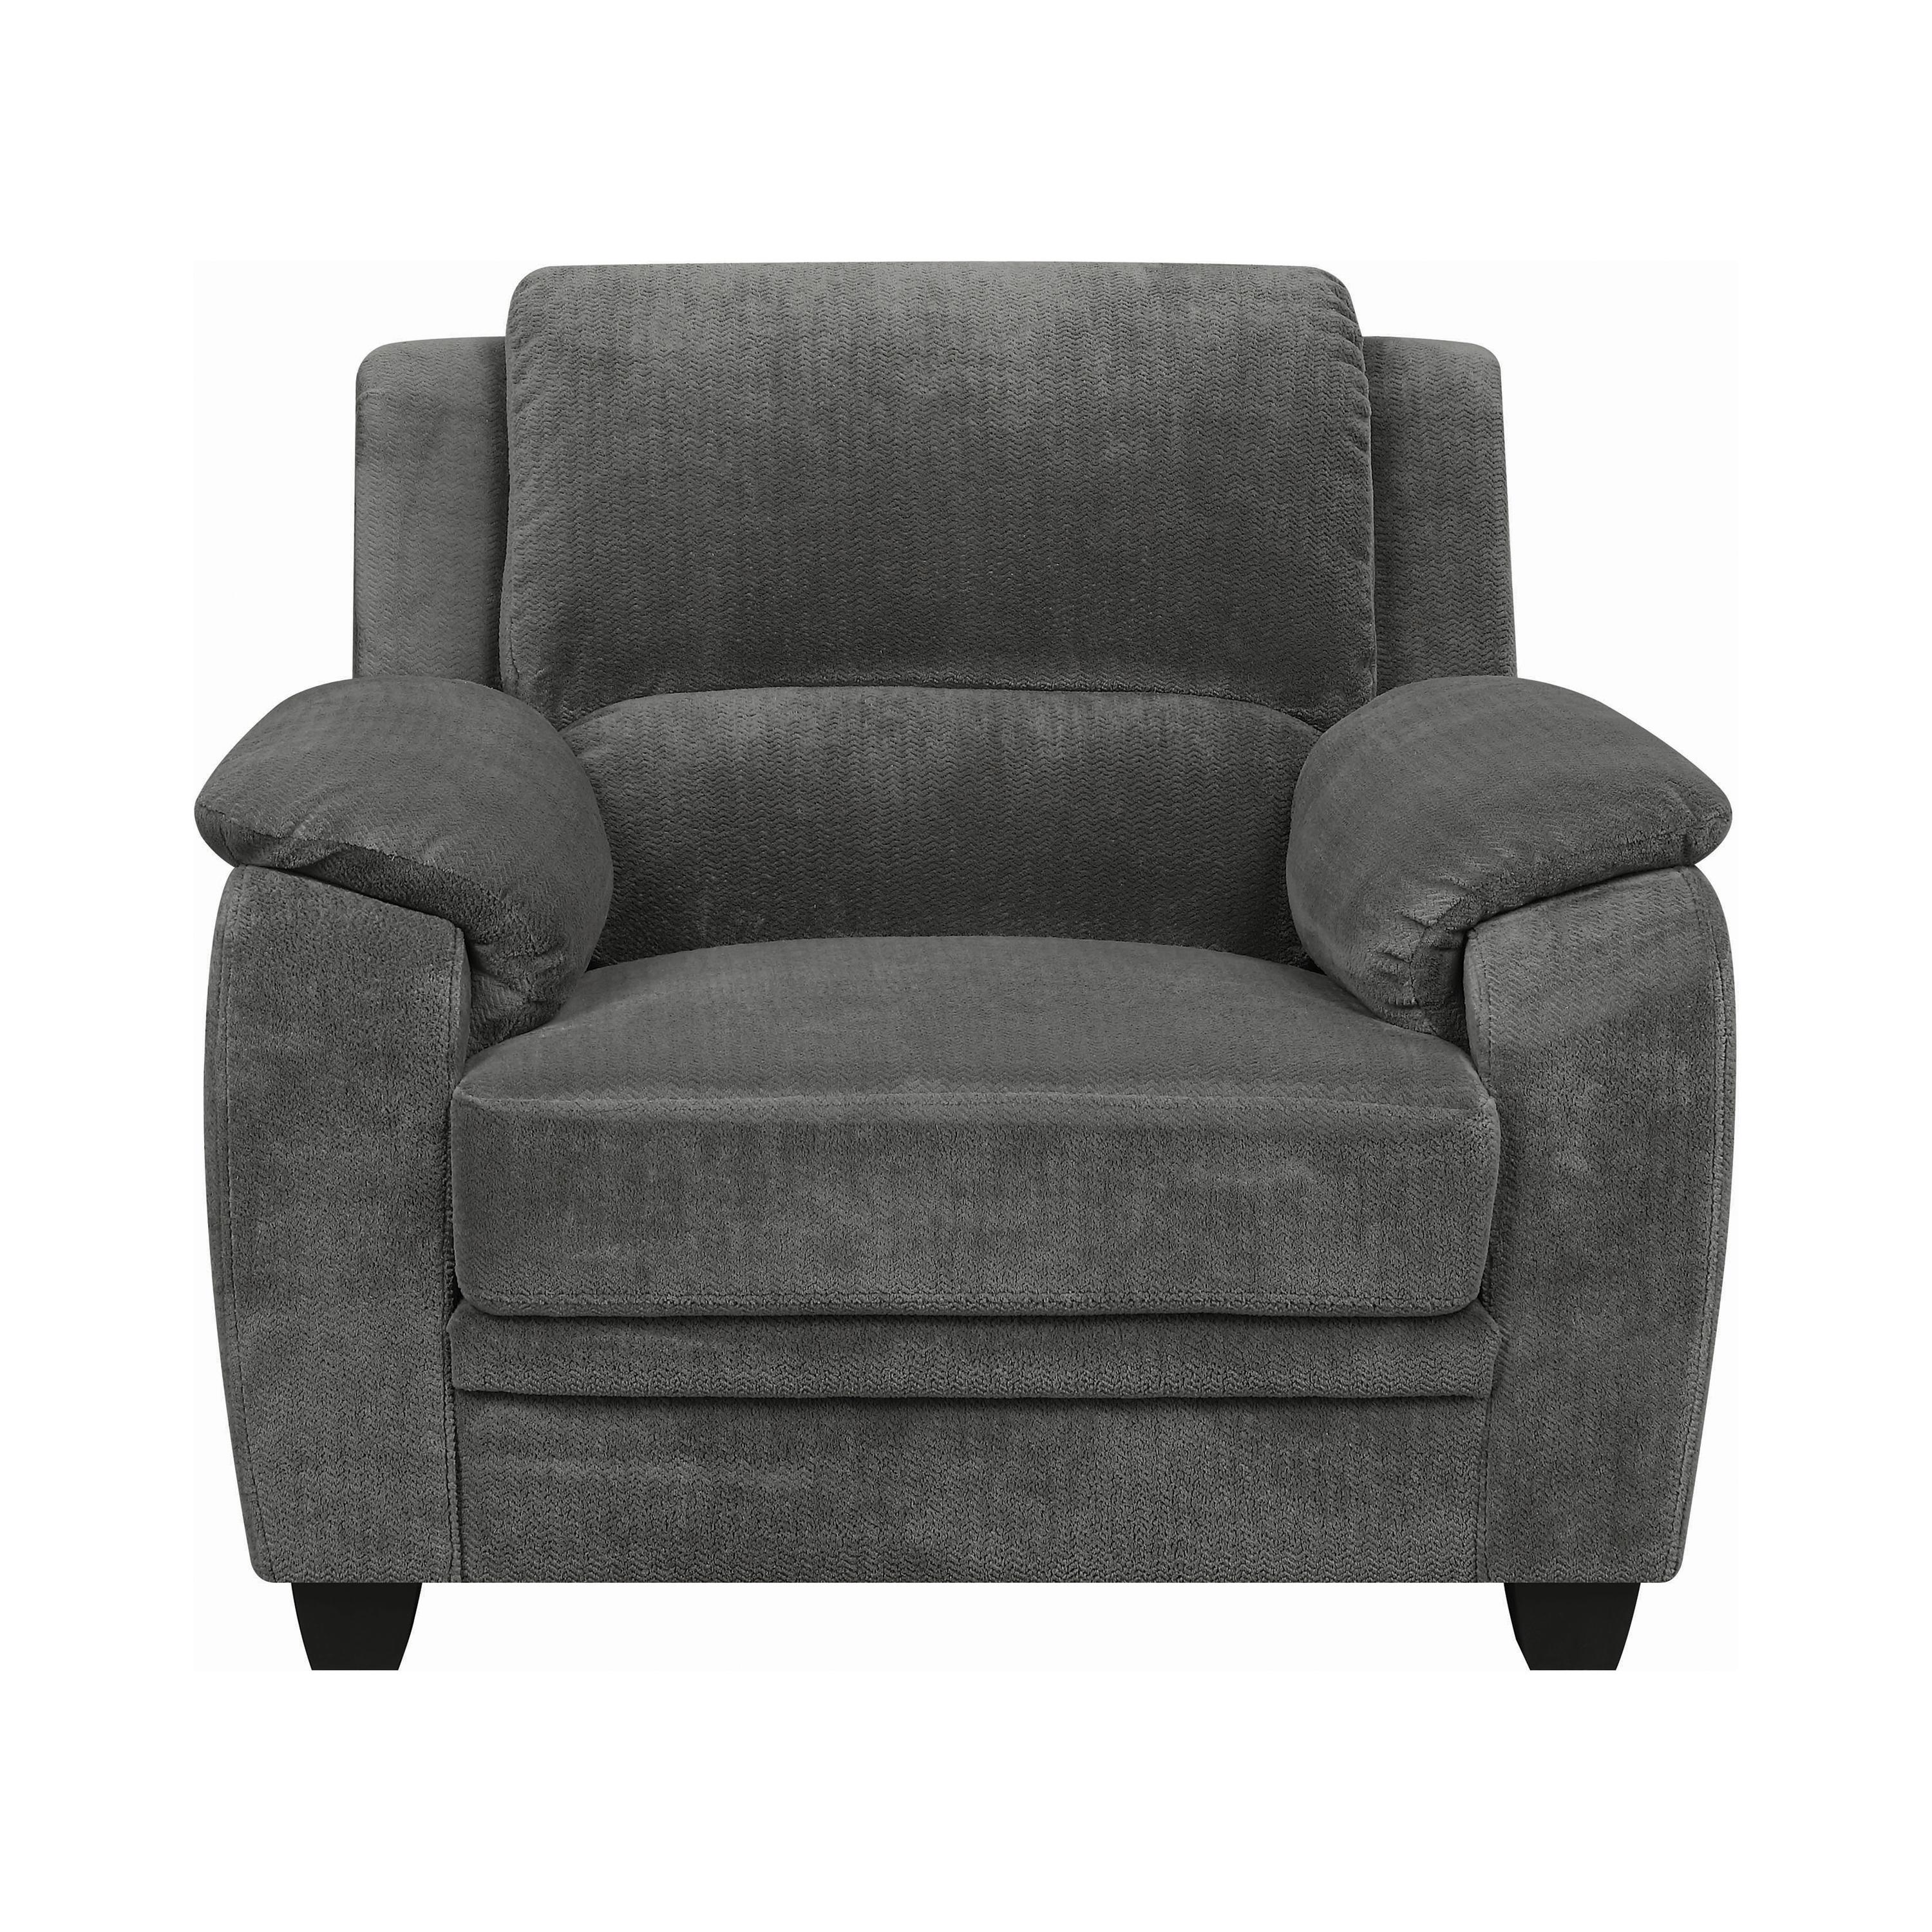 Transitional Arm Chair 506243 Northend 506243 in Charcoal 